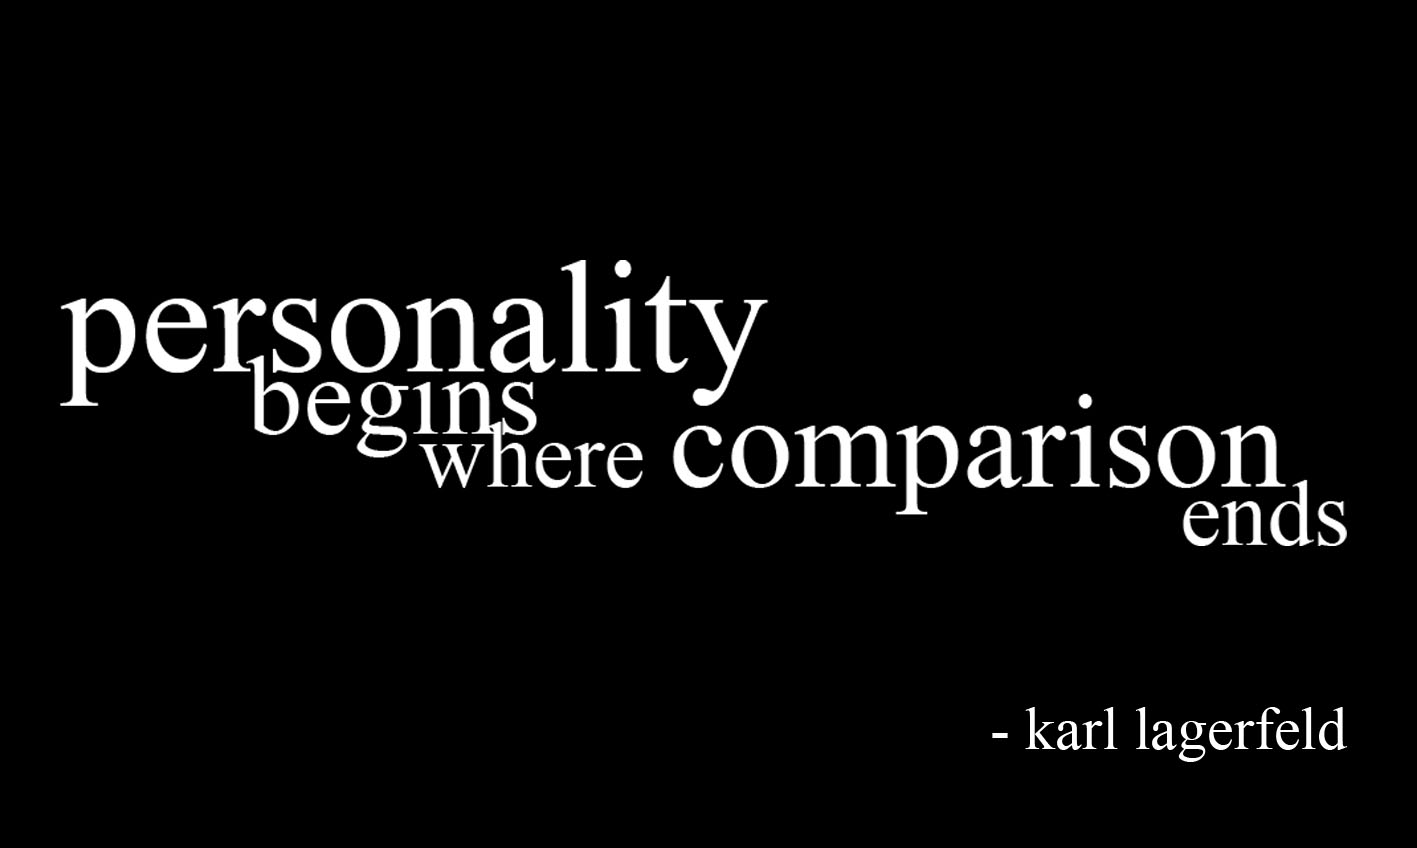 Karl Lagerfeld's quote #2